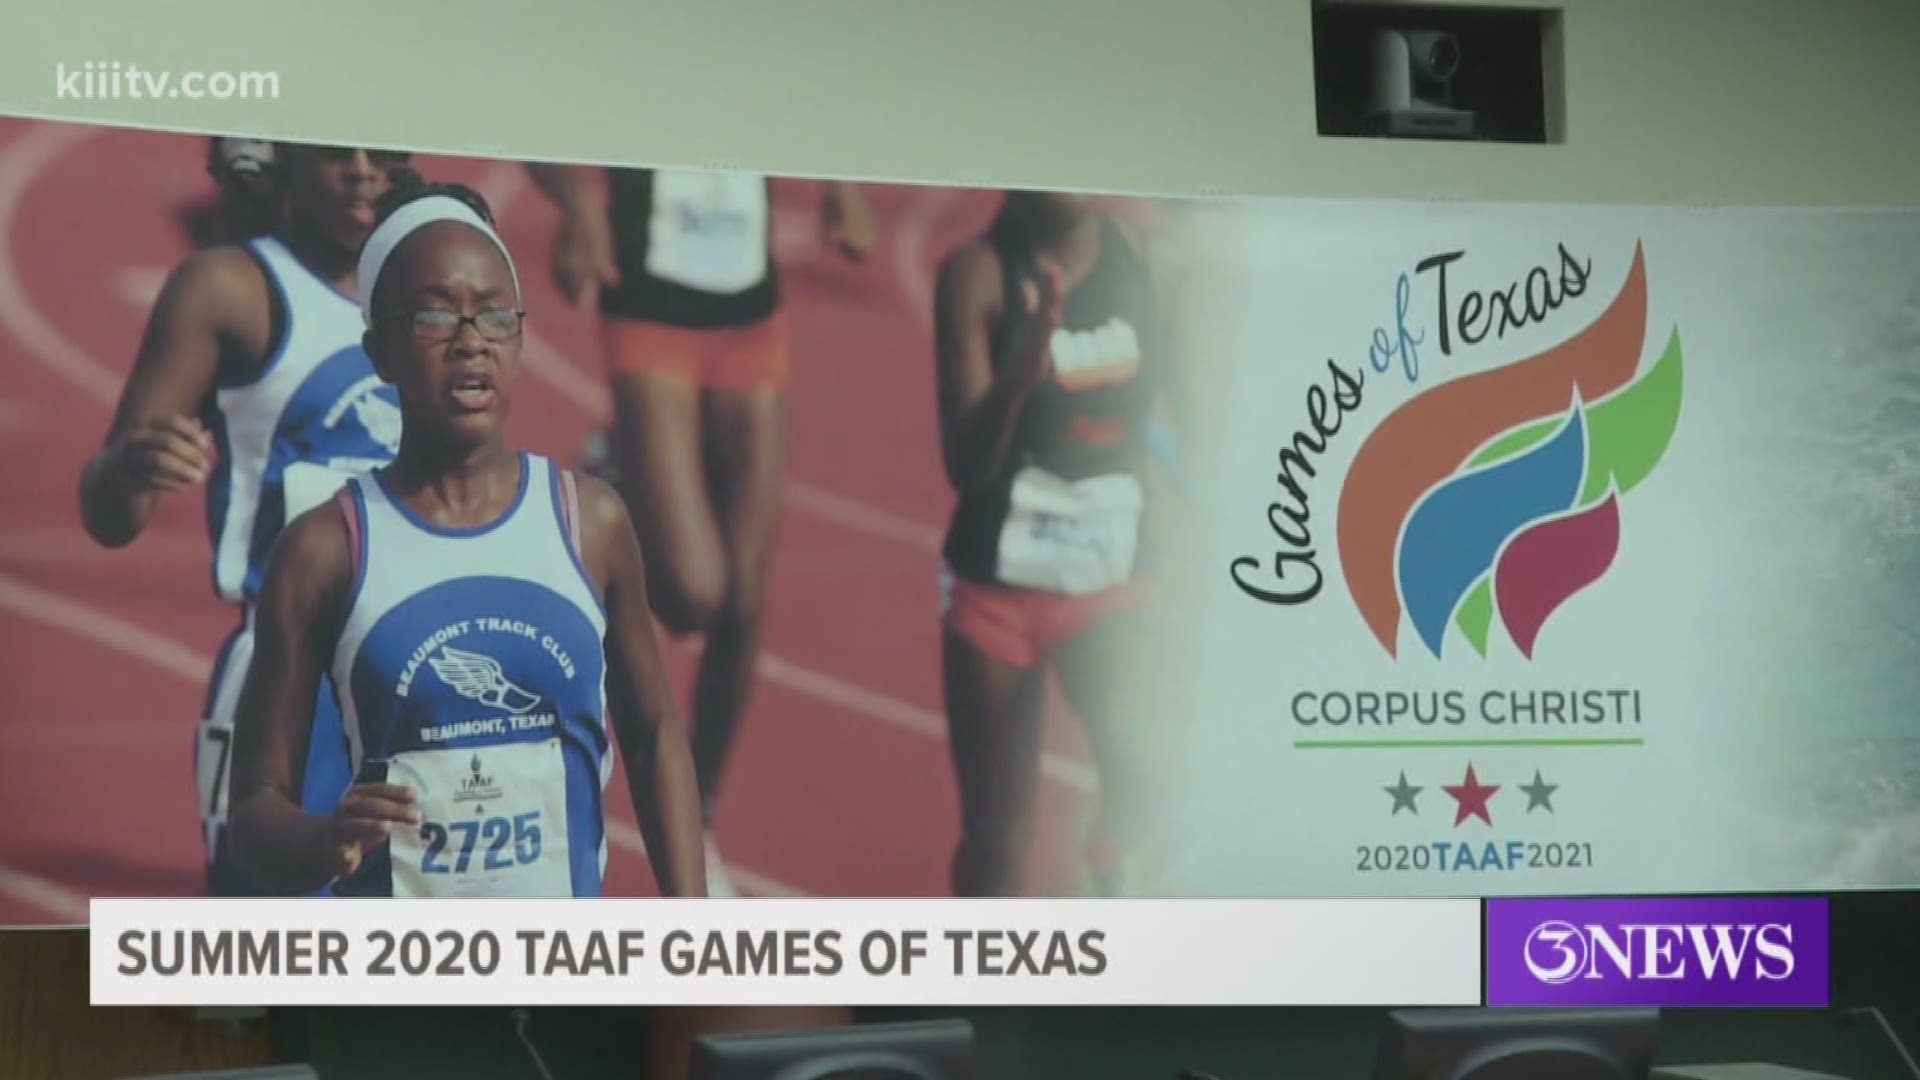 The City of Corpus Christi will be playing host to the Summer 2020 TAAF Games of Texas.